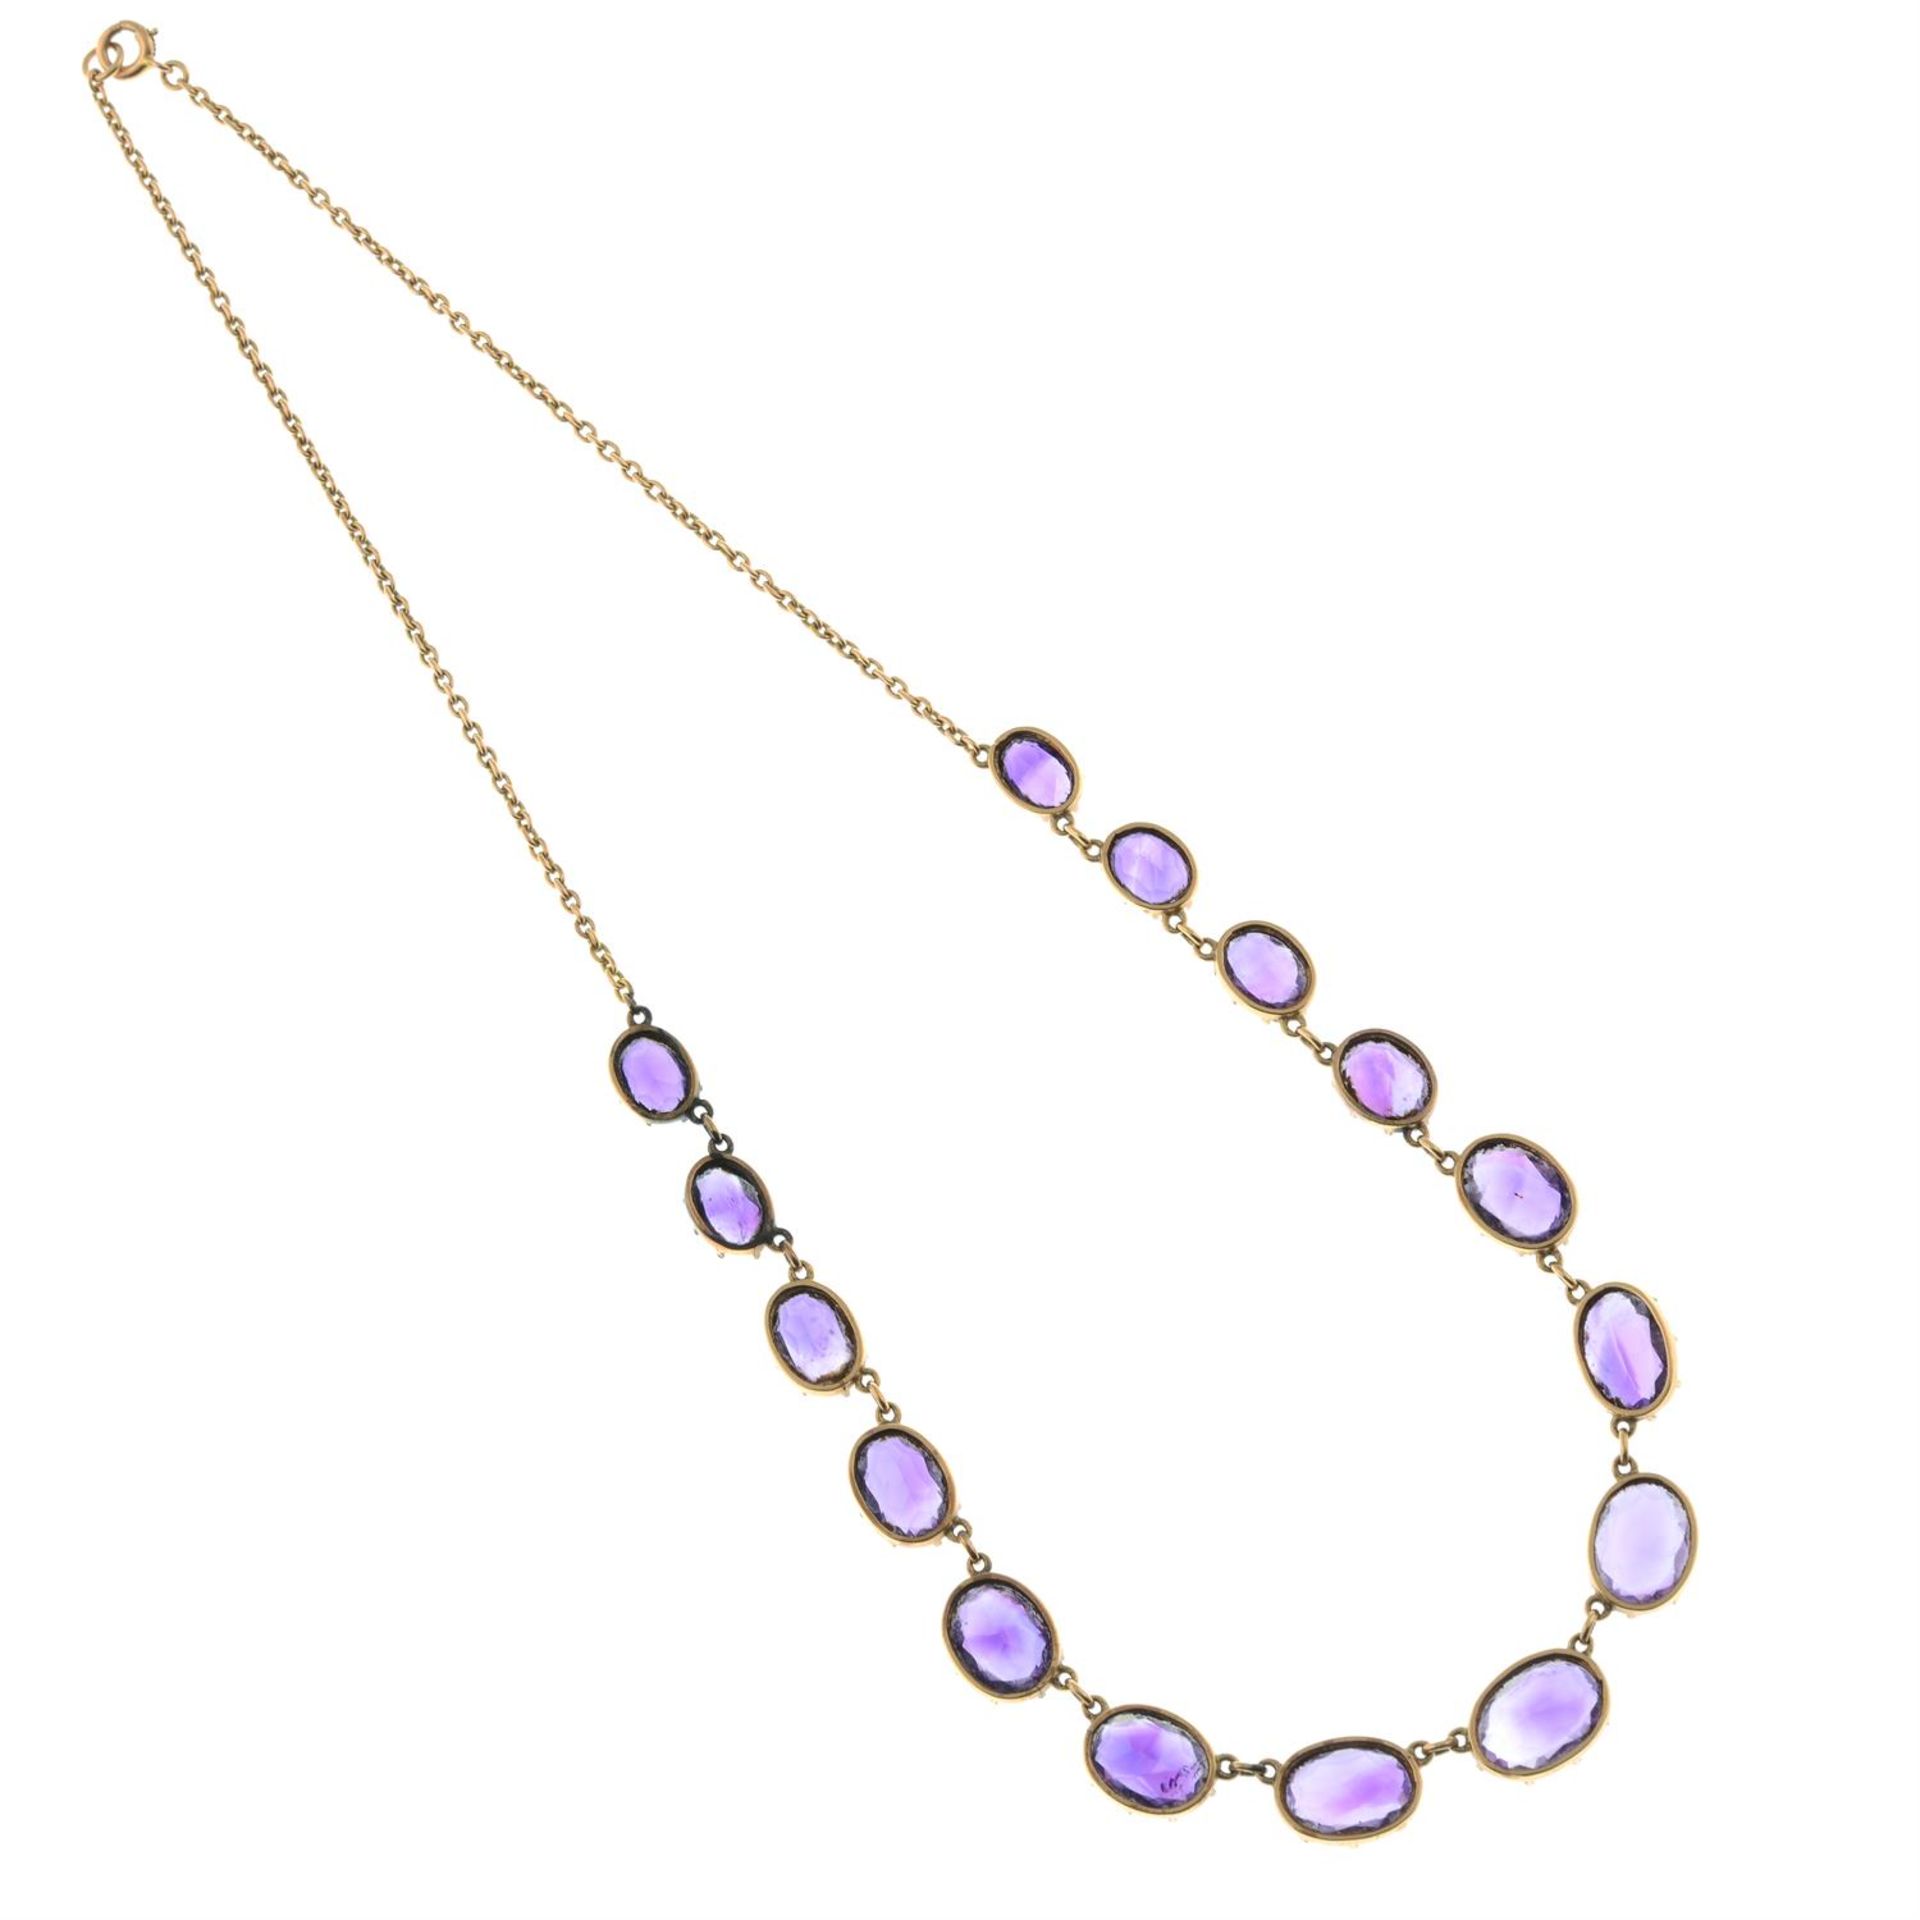 A 19th century gold graduated amethyst rivière necklace, with chain-link back-chain. - Image 4 of 4